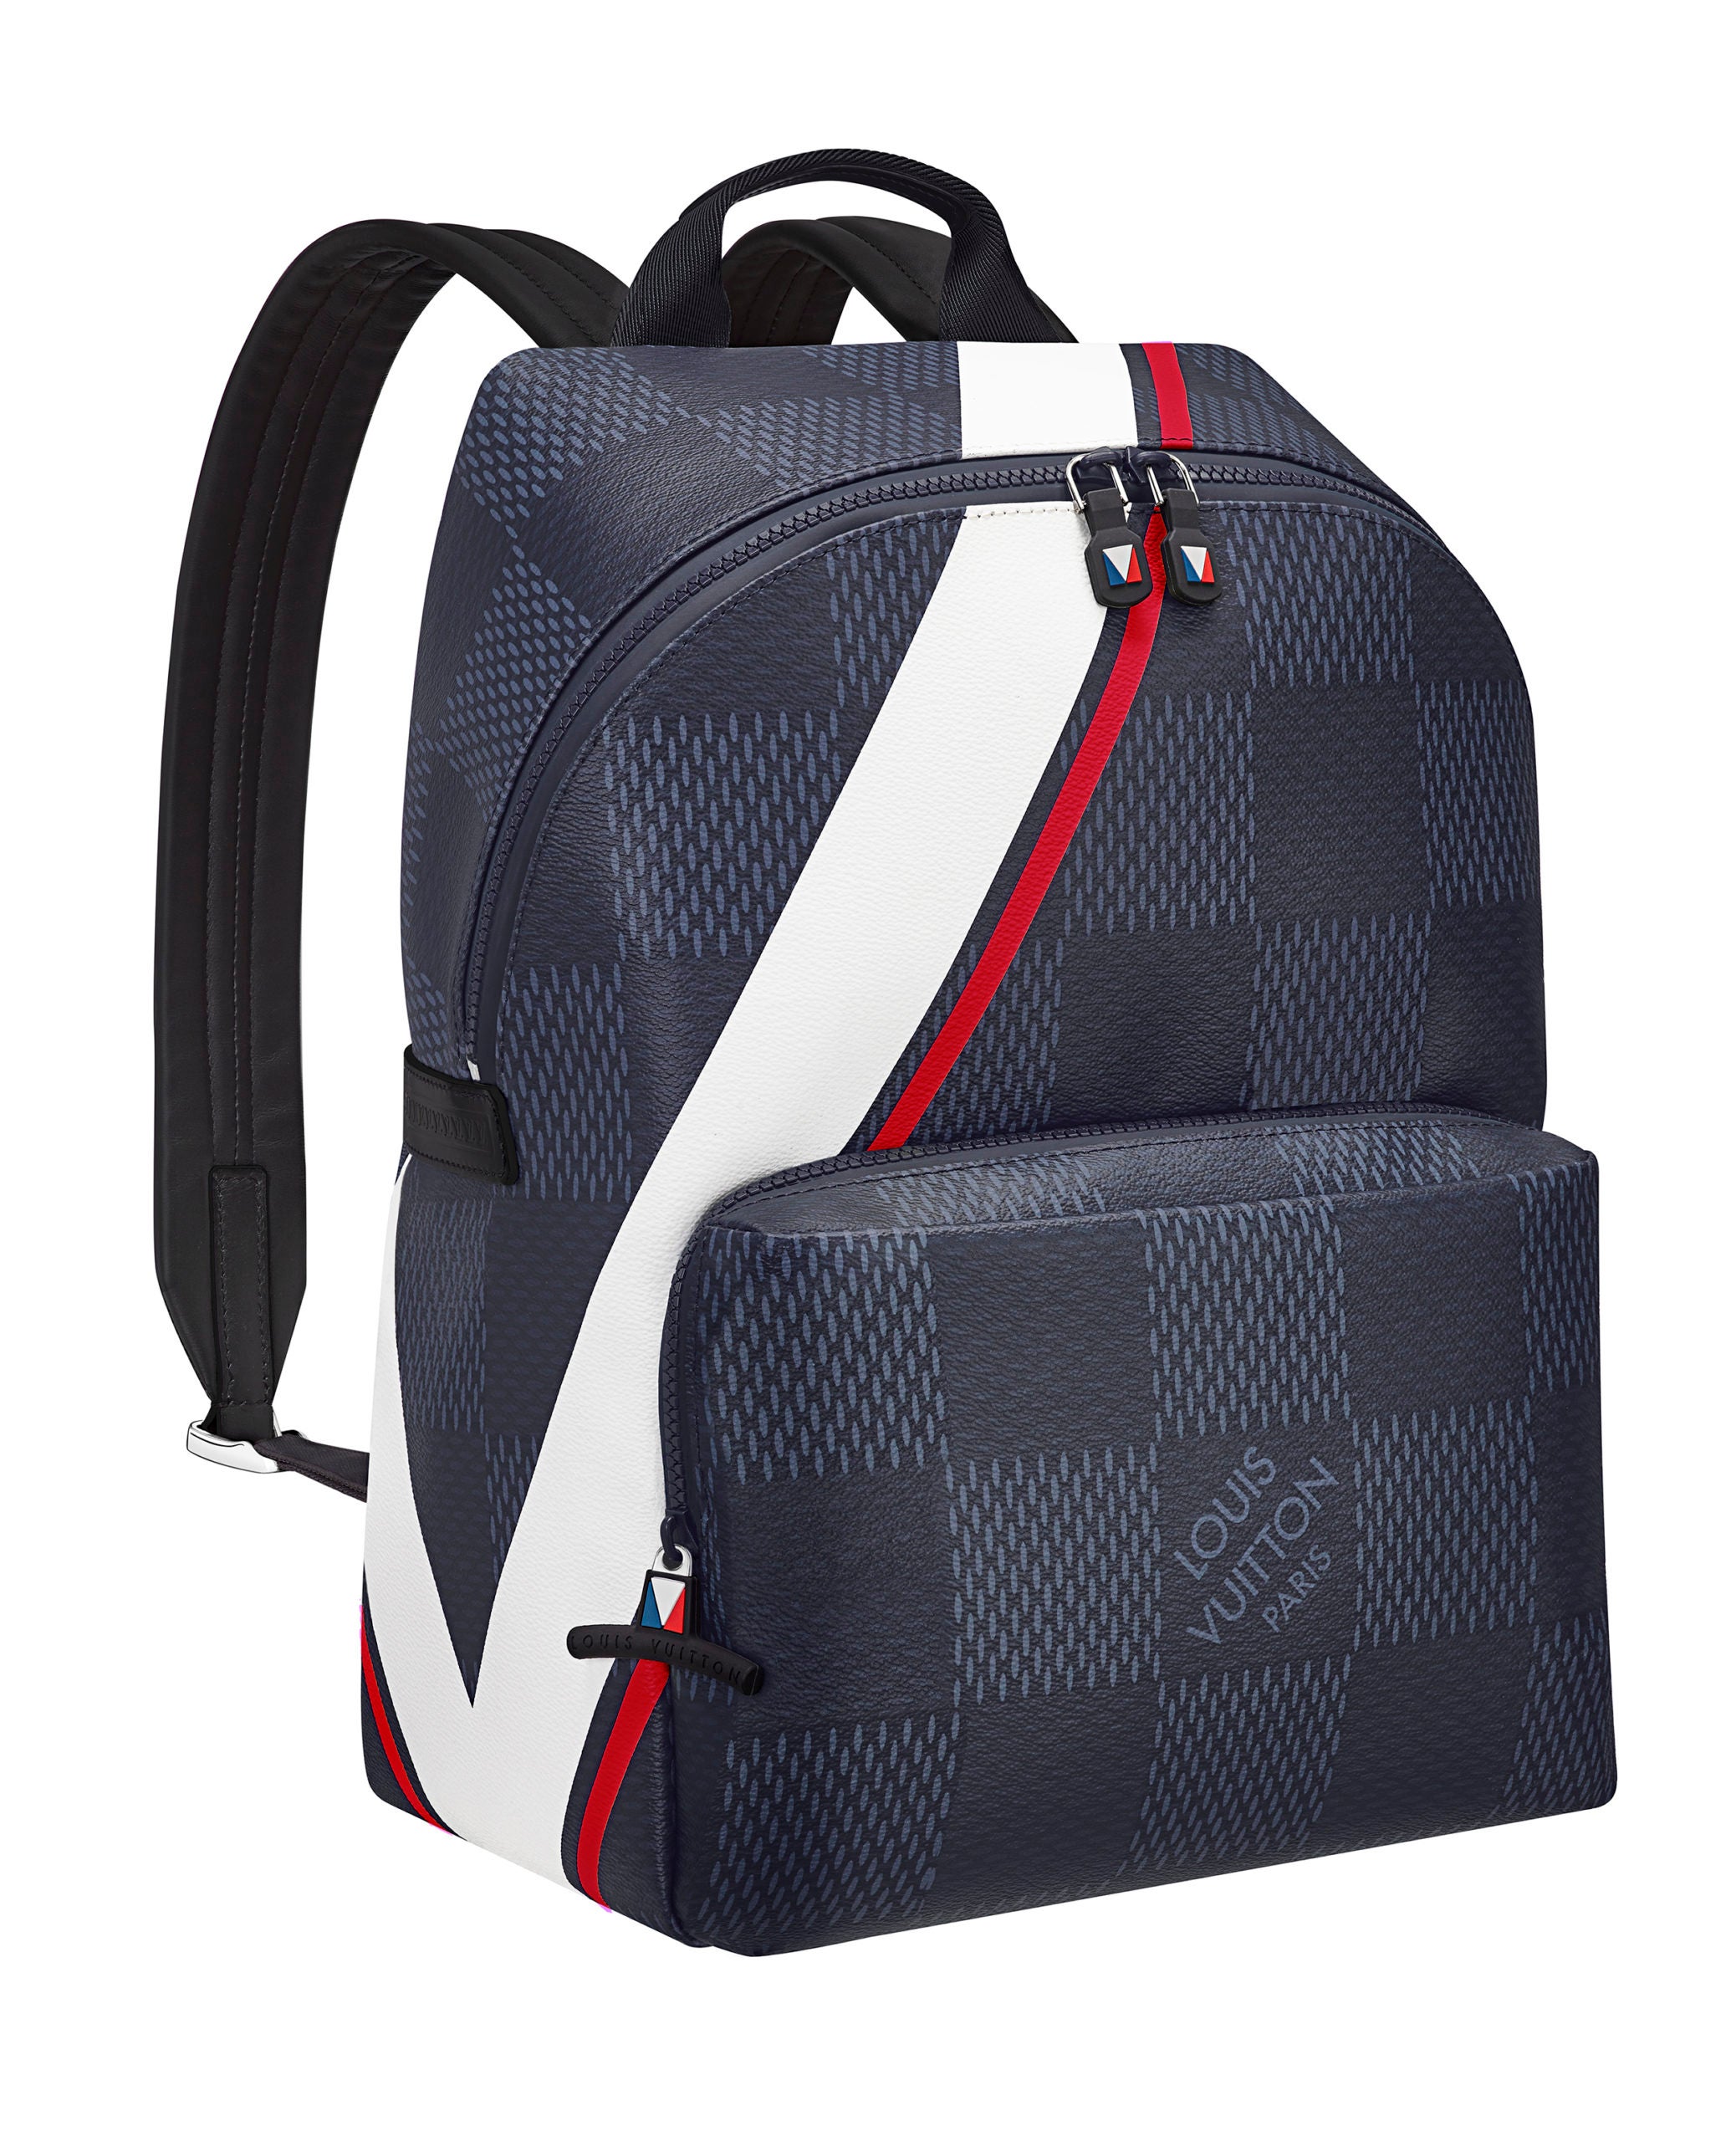 Louis Vuitton Launches America's Cup Collection